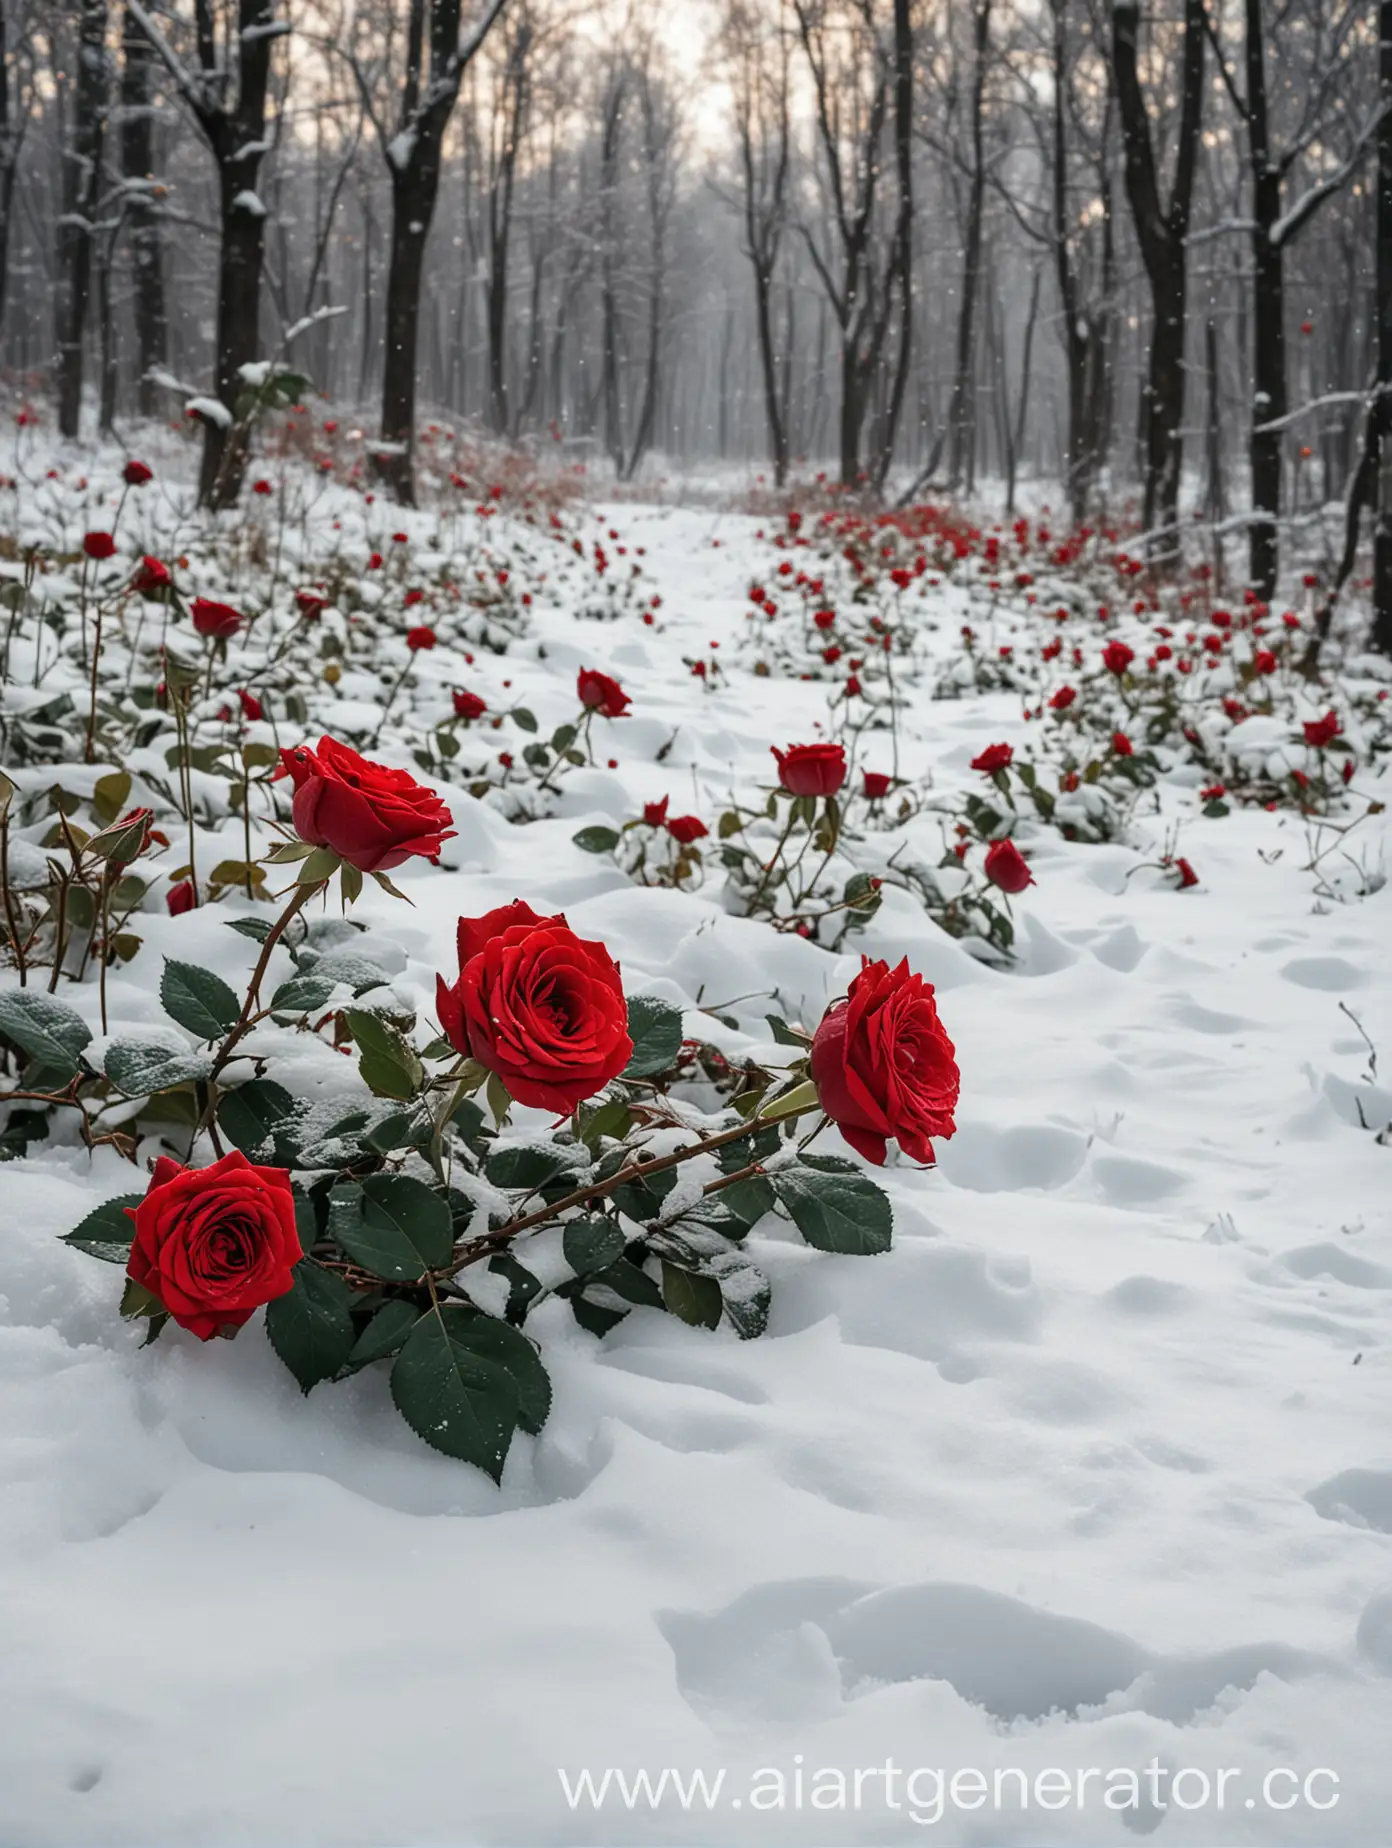 Vibrant-Red-Roses-Blossoming-in-Snowy-Forest-Scene